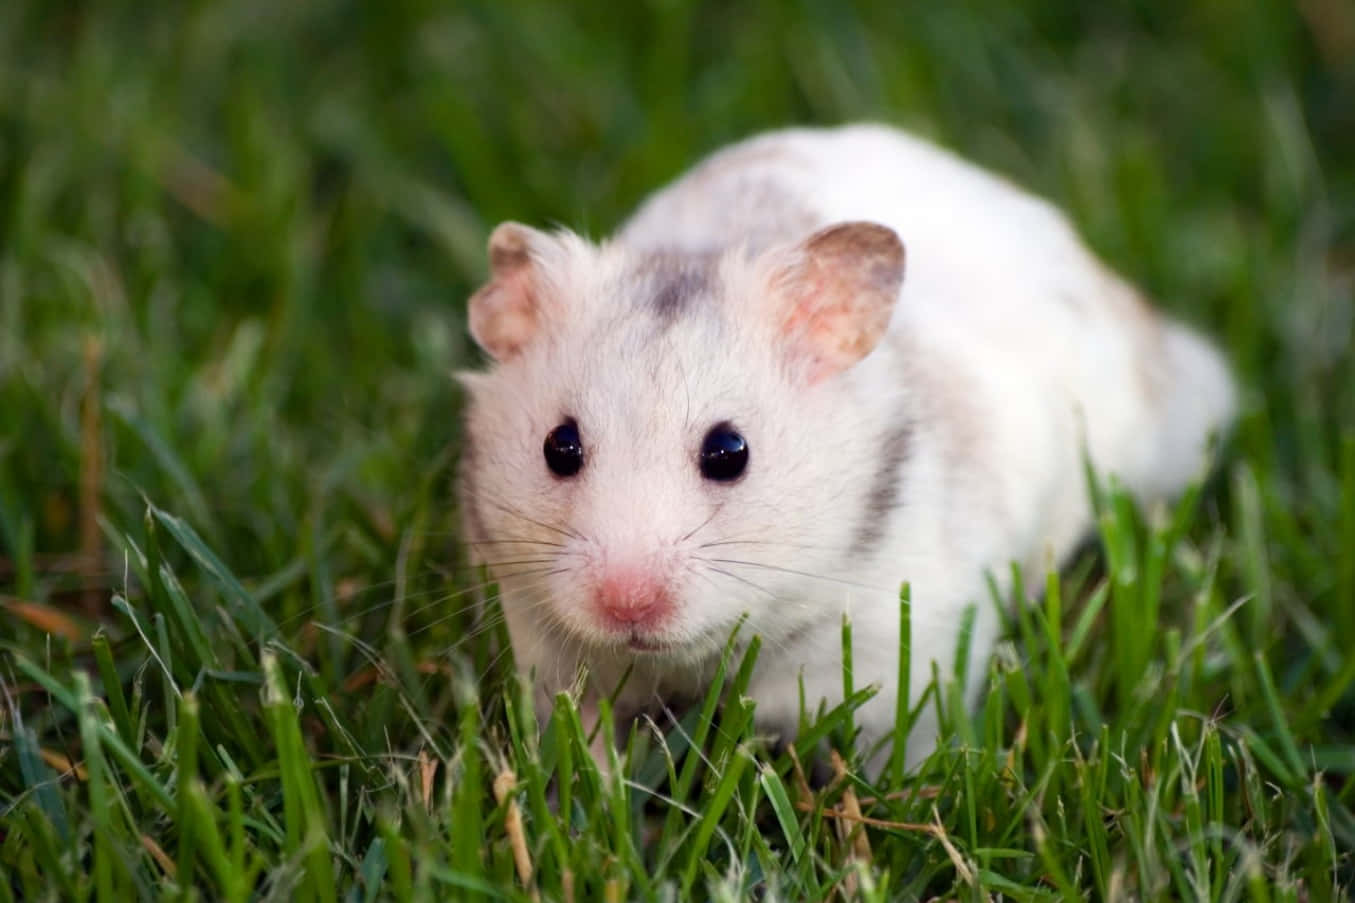 A White And Brown Hamster Is Walking Through The Grass